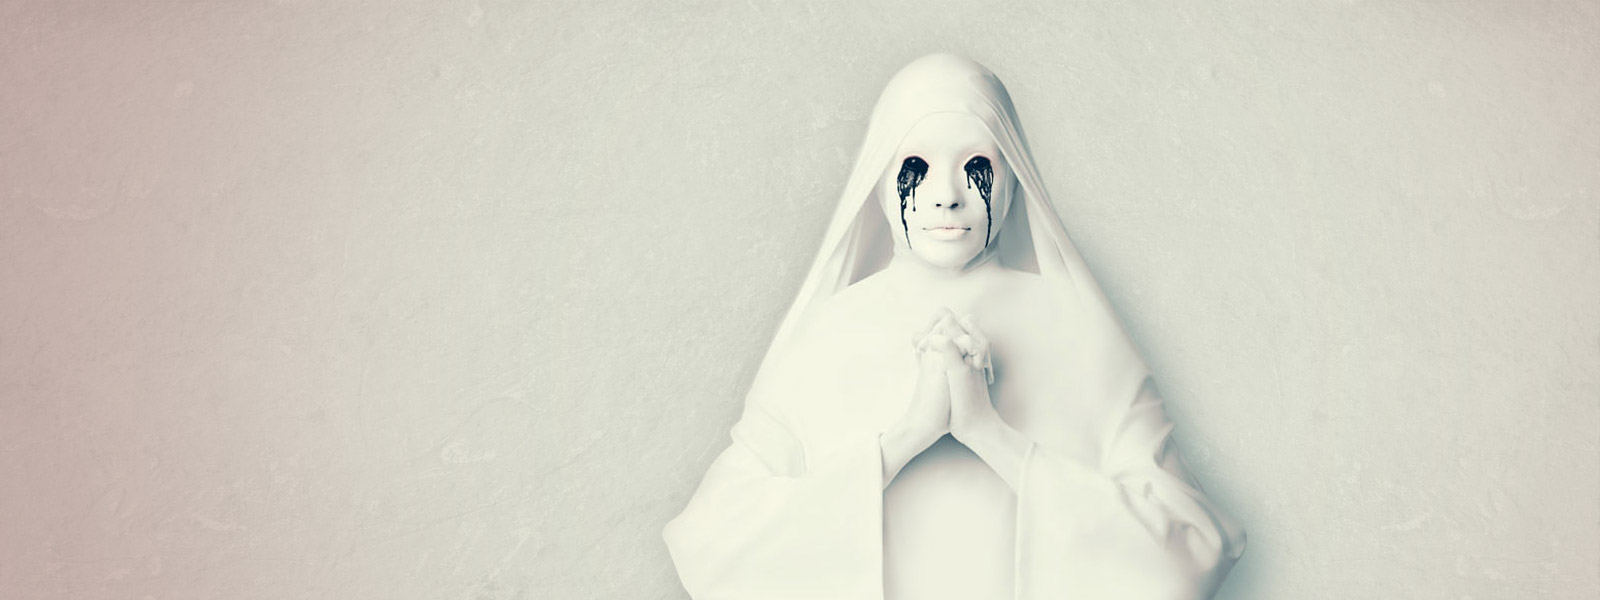 American Horror Story: Asylum to Briarcliff Review